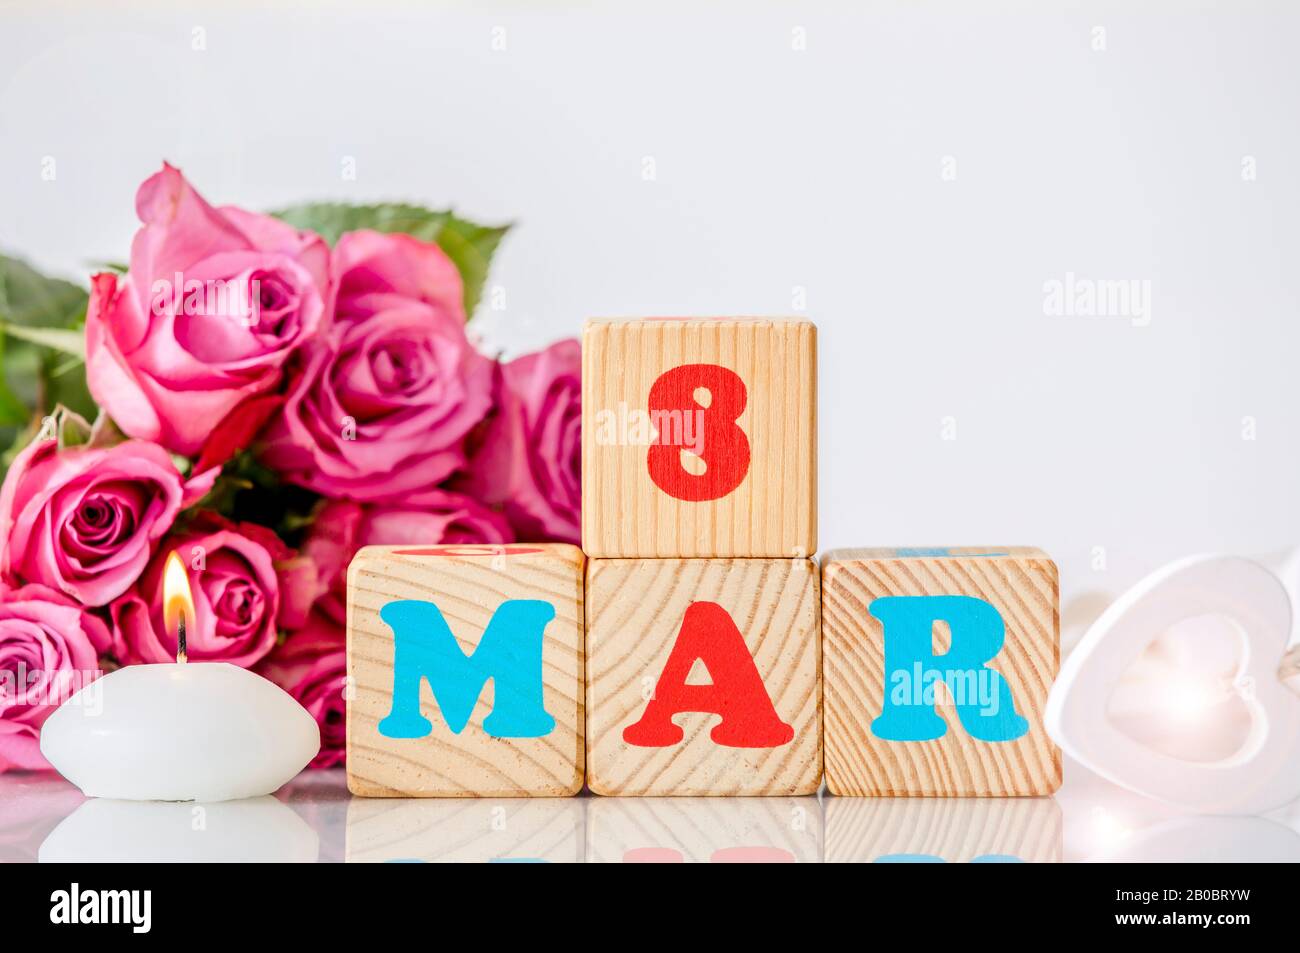 International Women's Day calendar greeting card background. With wood heart, relaxing candle burning and decorative pink rose bouquet on background. Stock Photo